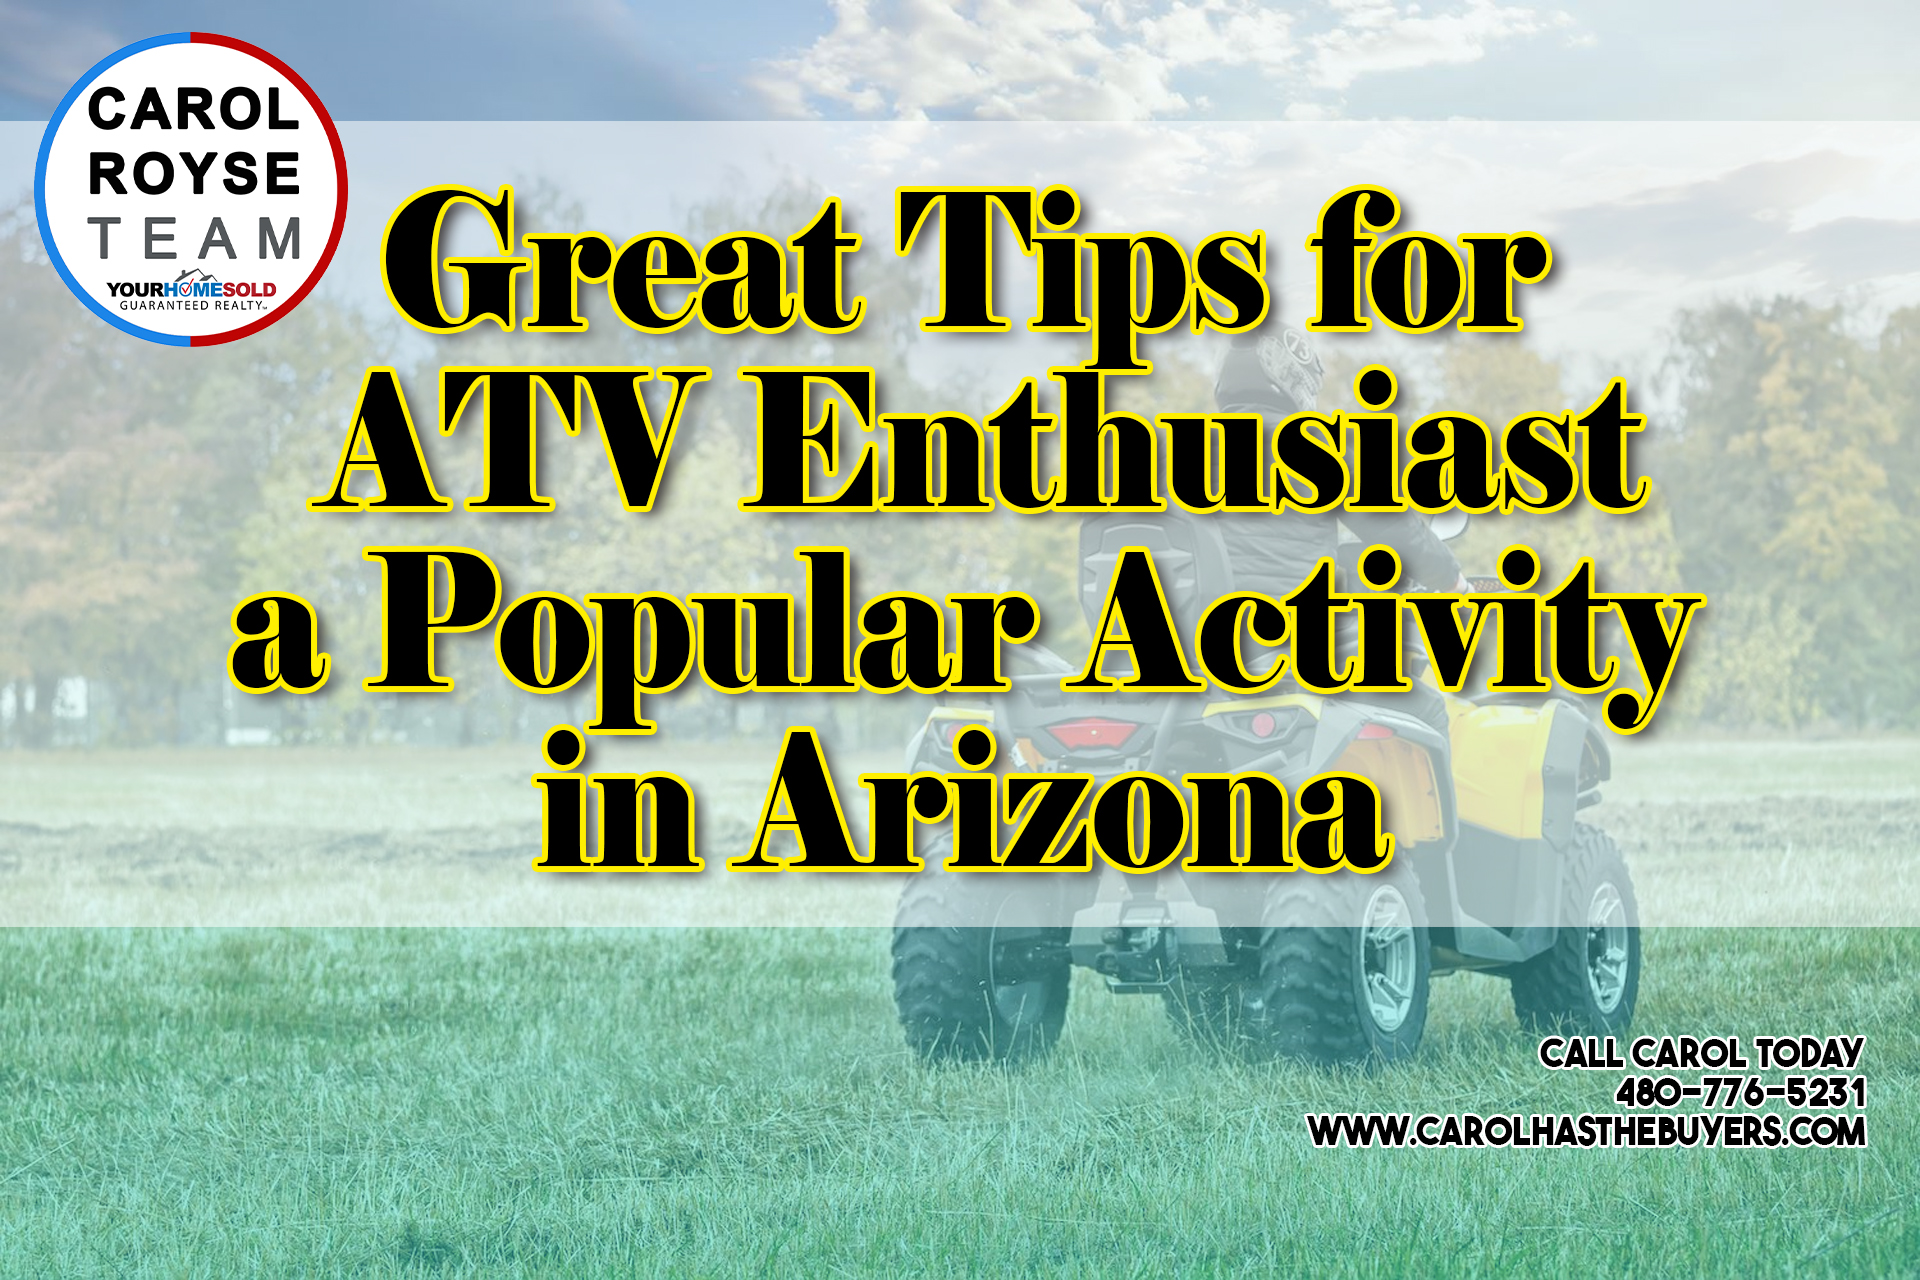 Great Tips for ATV Enthusiast a Popular Activity in Arizona